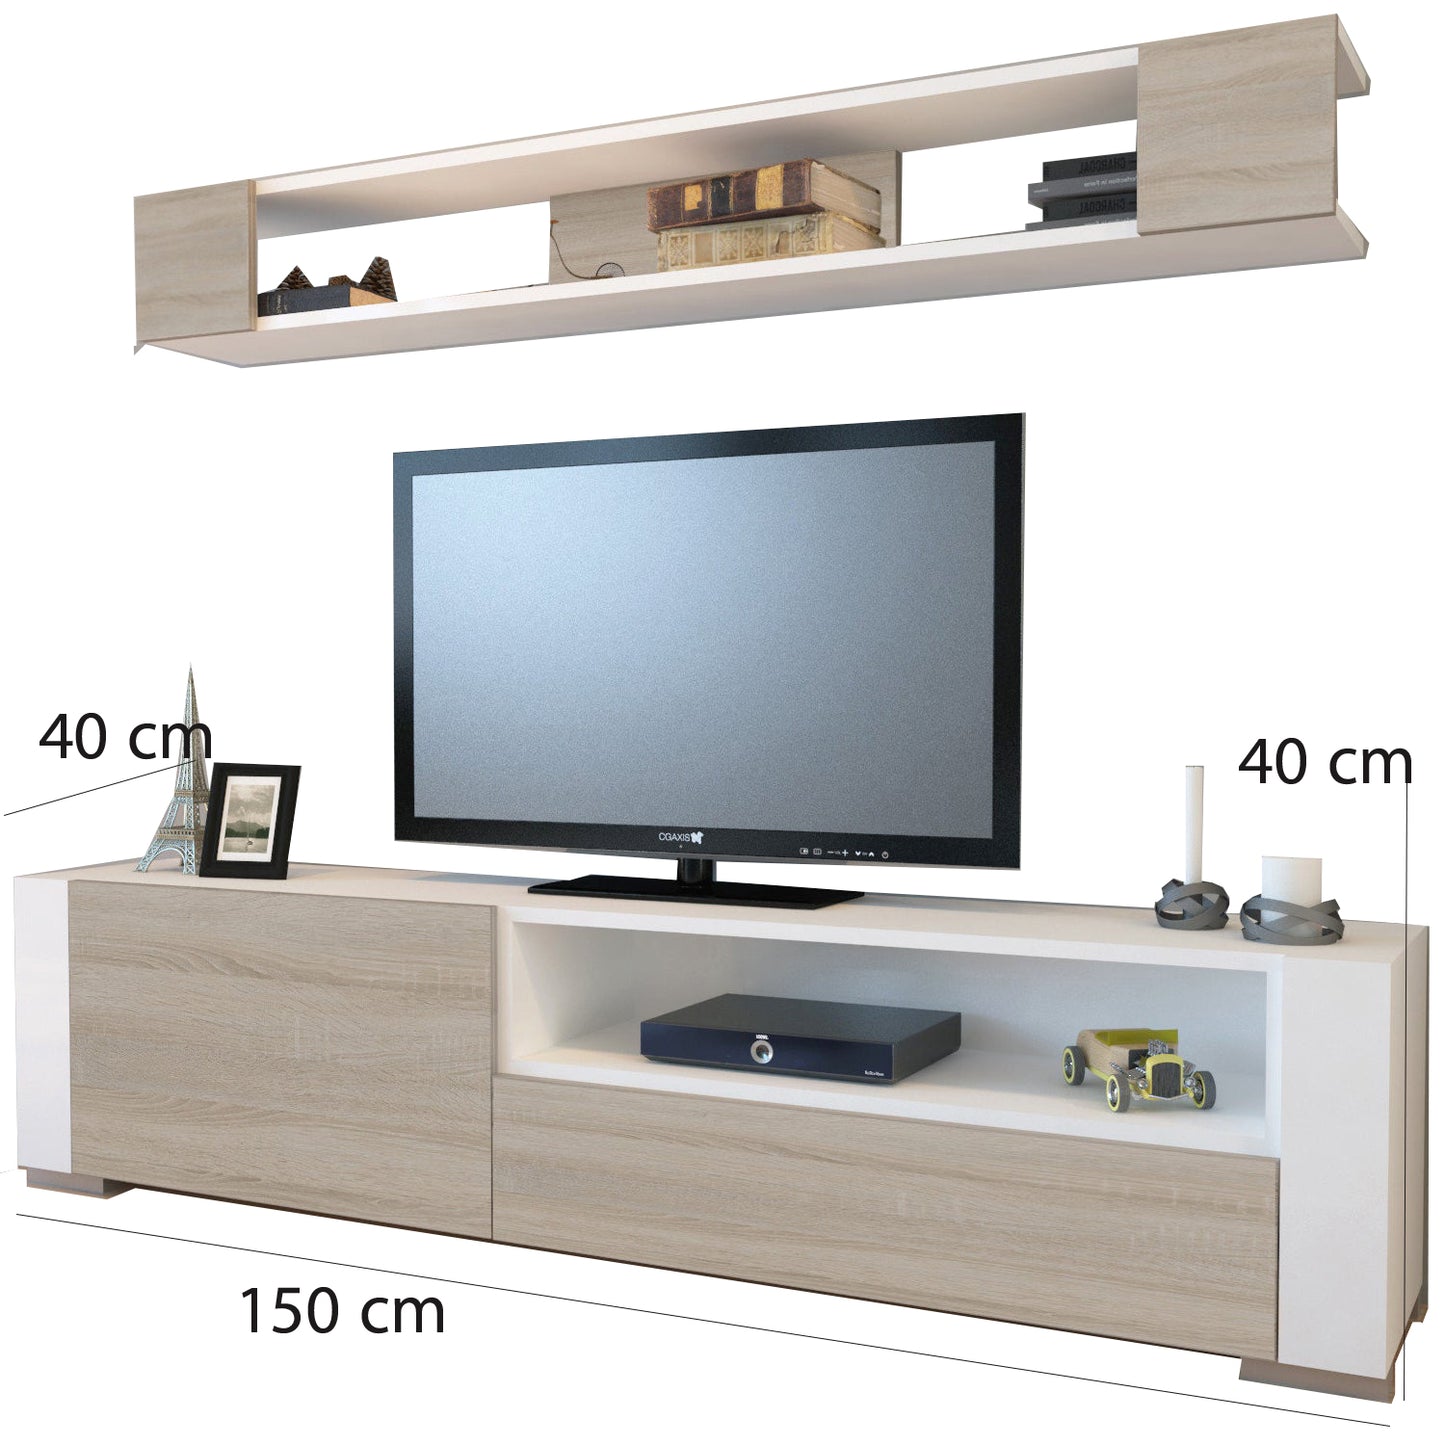 TV table 40 x 150 cm - FNH411